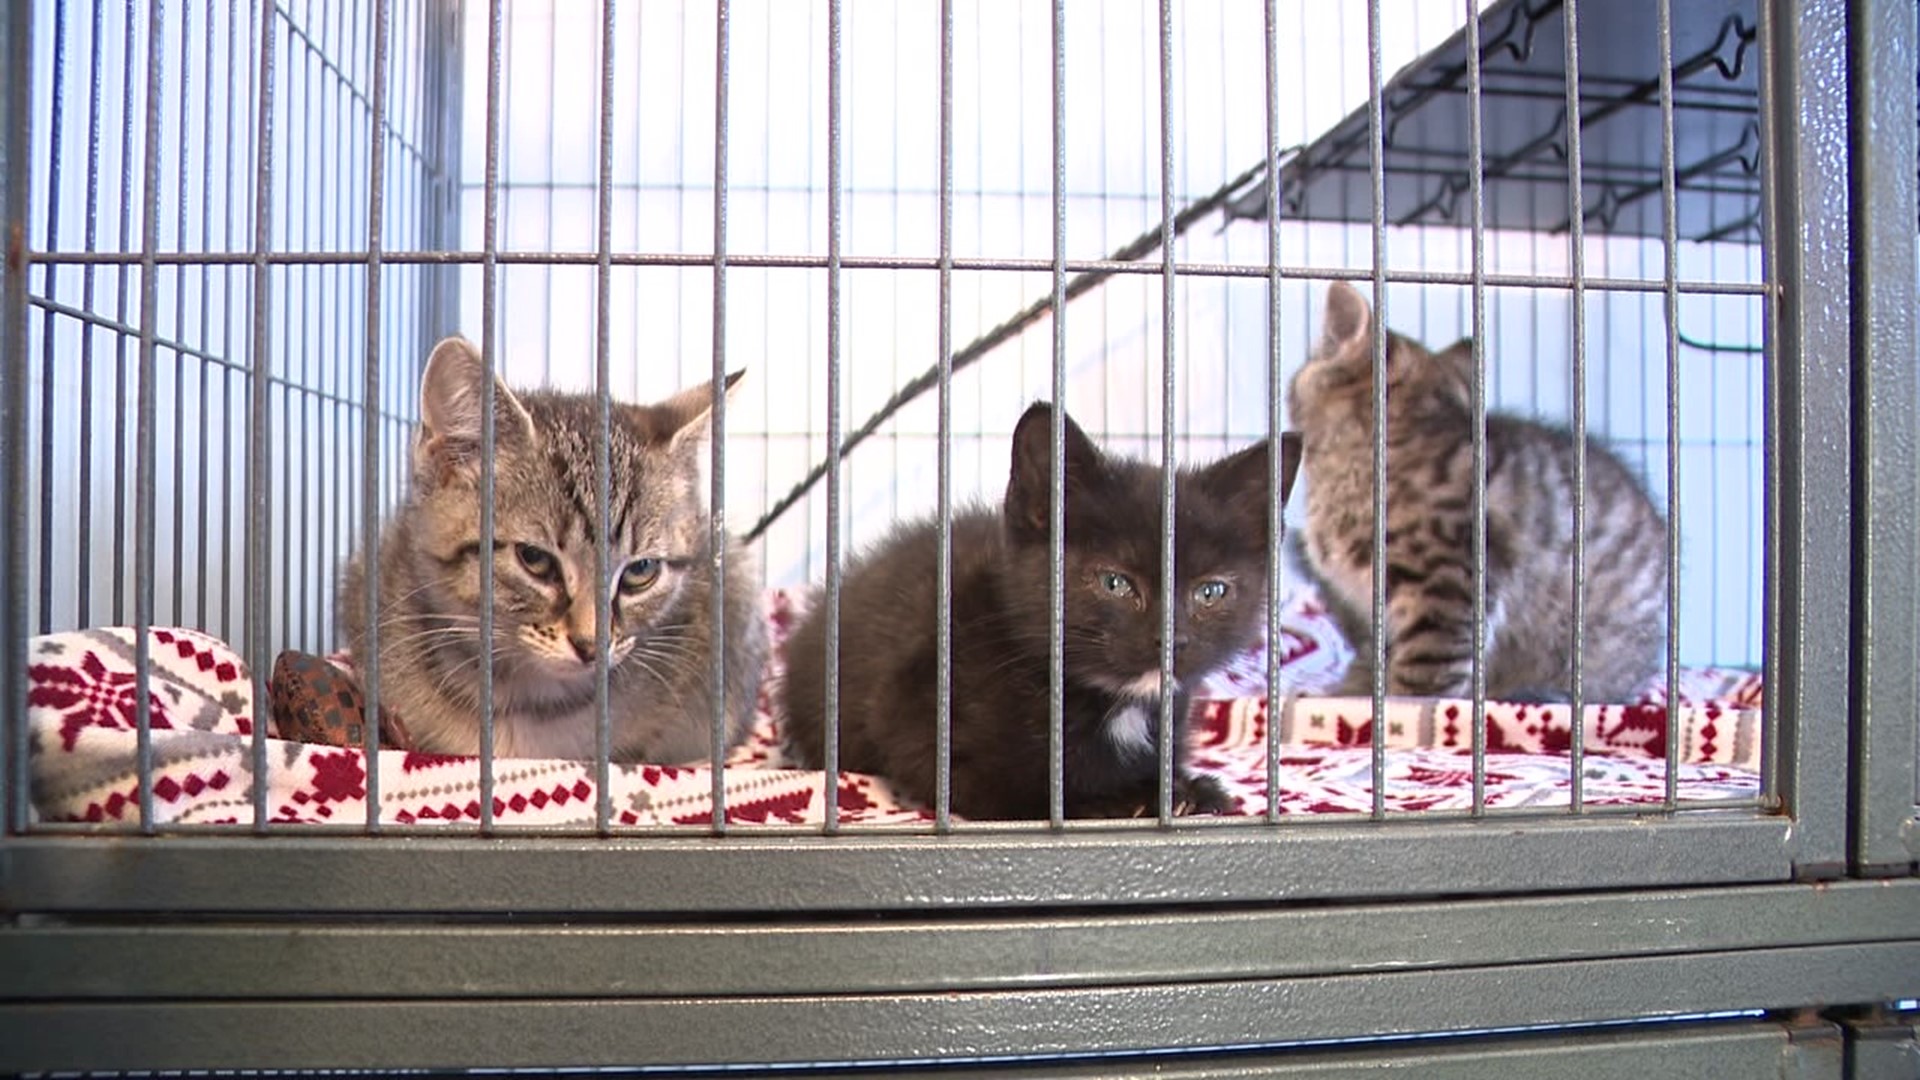 More than 50 cats were found at a dilapidated property, many of them had died. Causing animal shelters throughout the county to come together for the rescue.